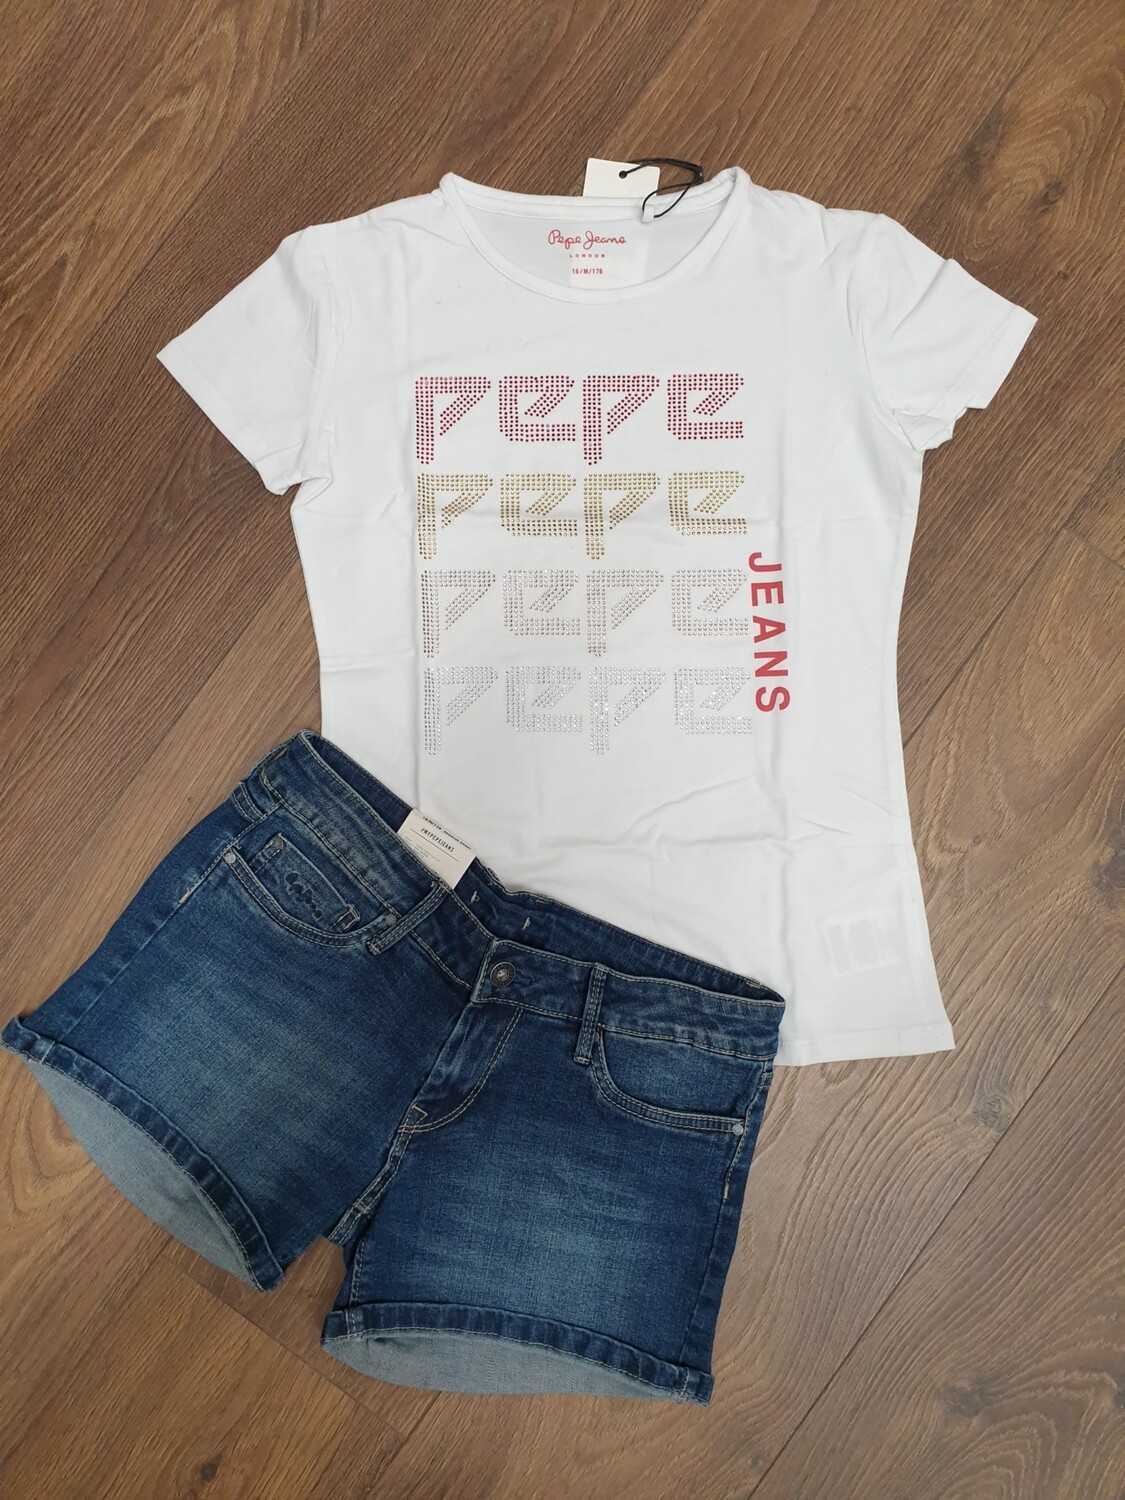 Completo Pepejeans